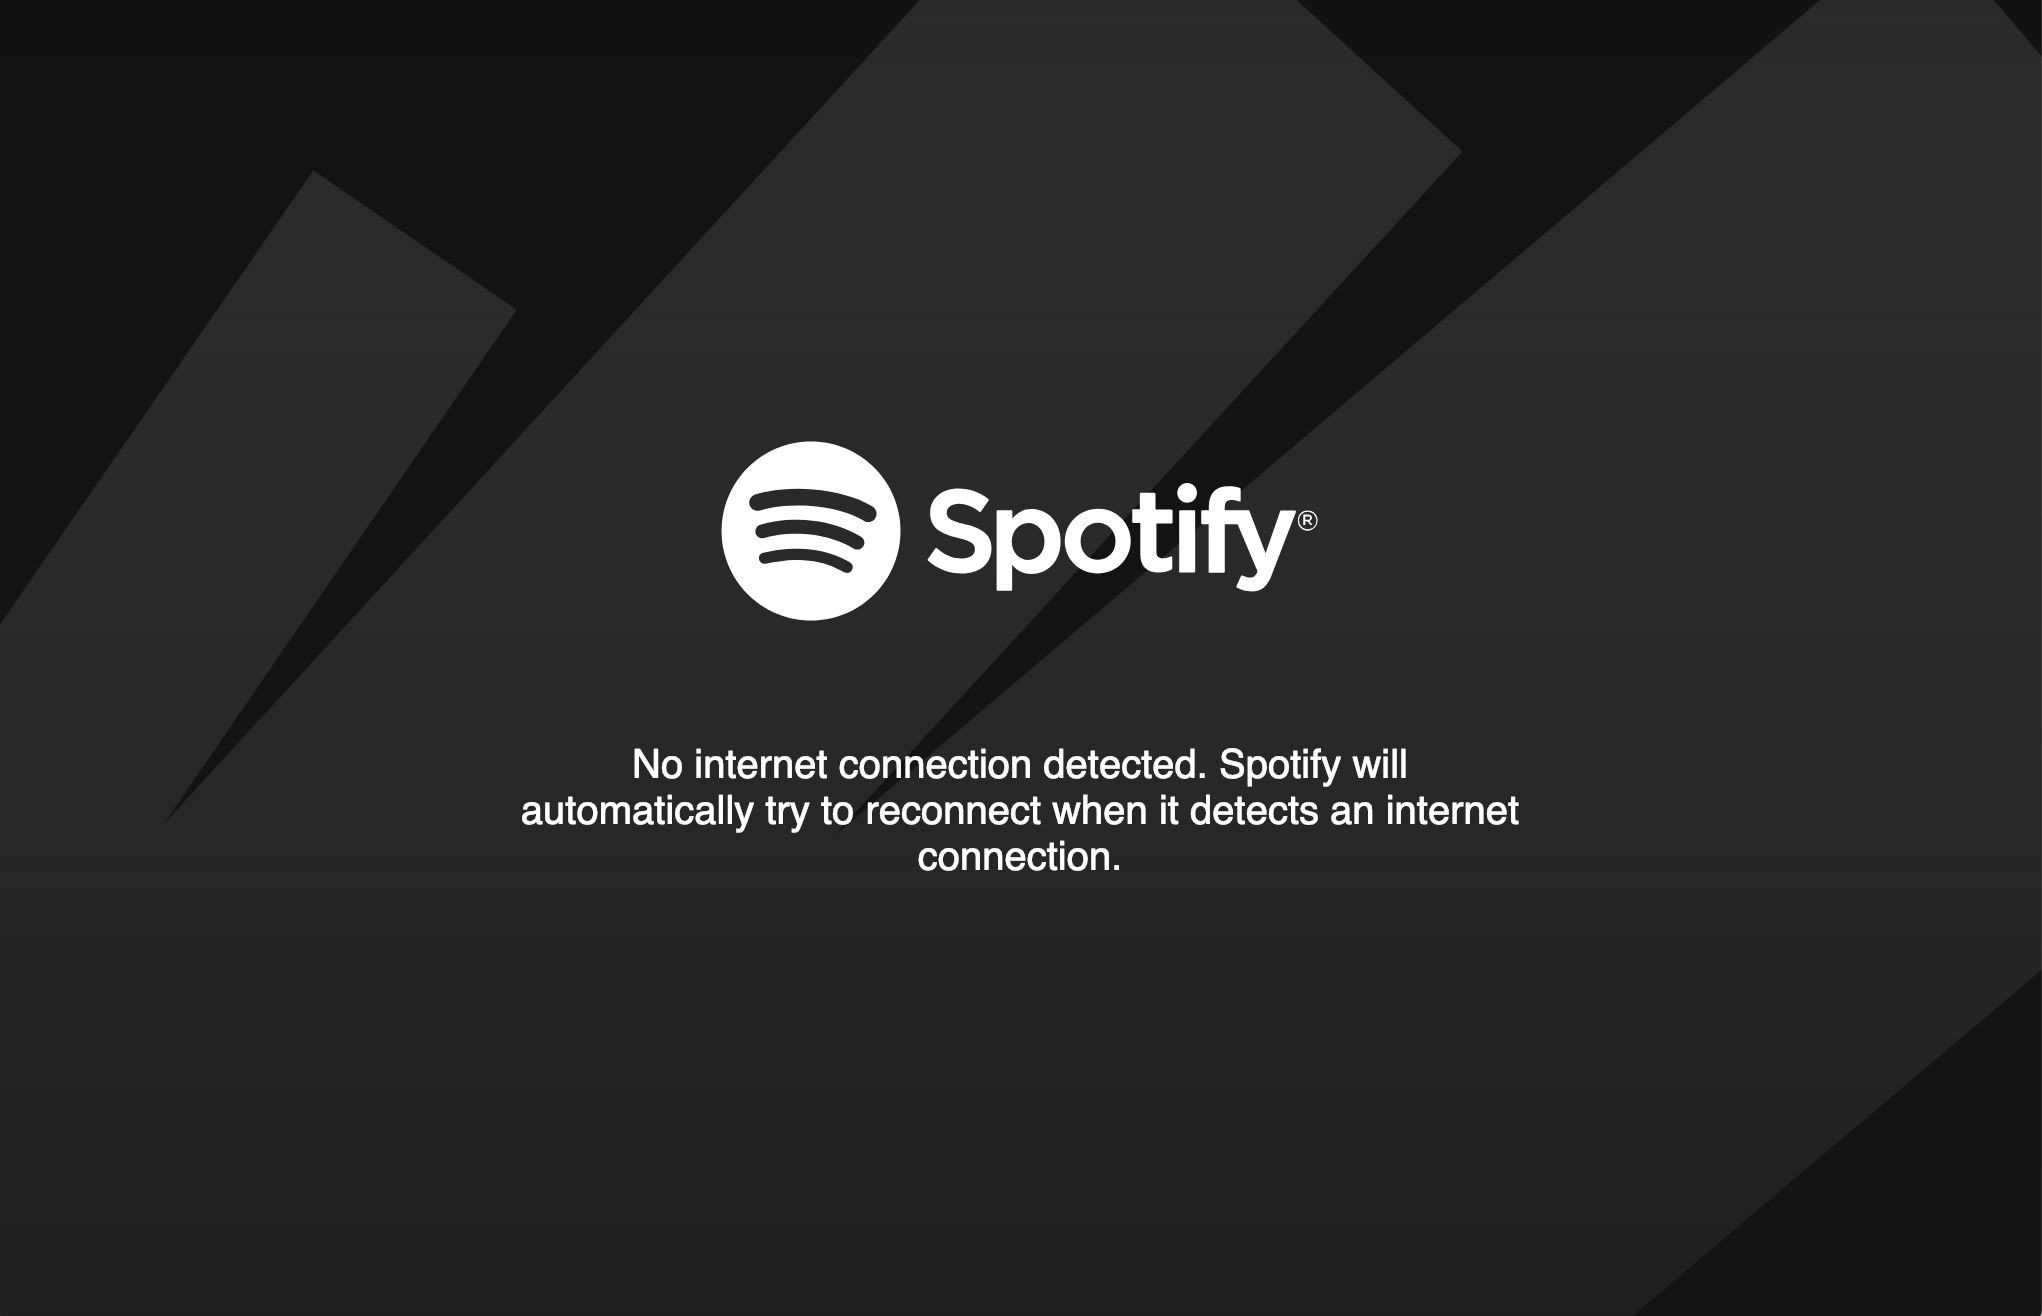 Spotify web player shows an offline page when there is no internet connection